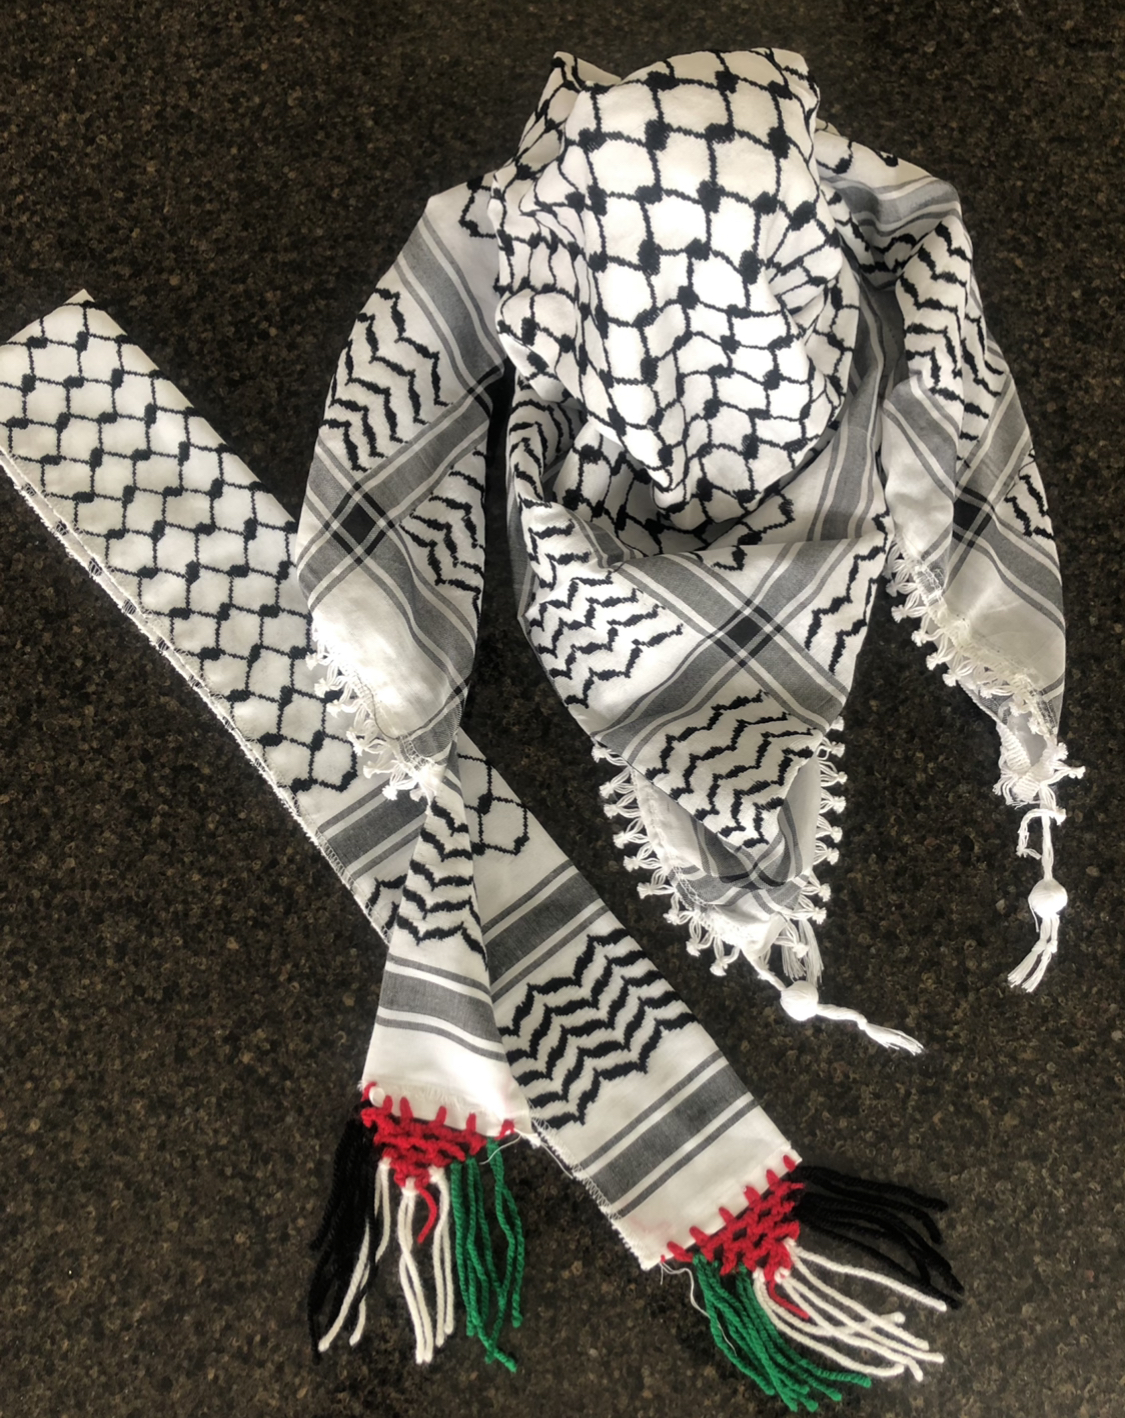 Auction For Palestinian Kufiya and Scarf